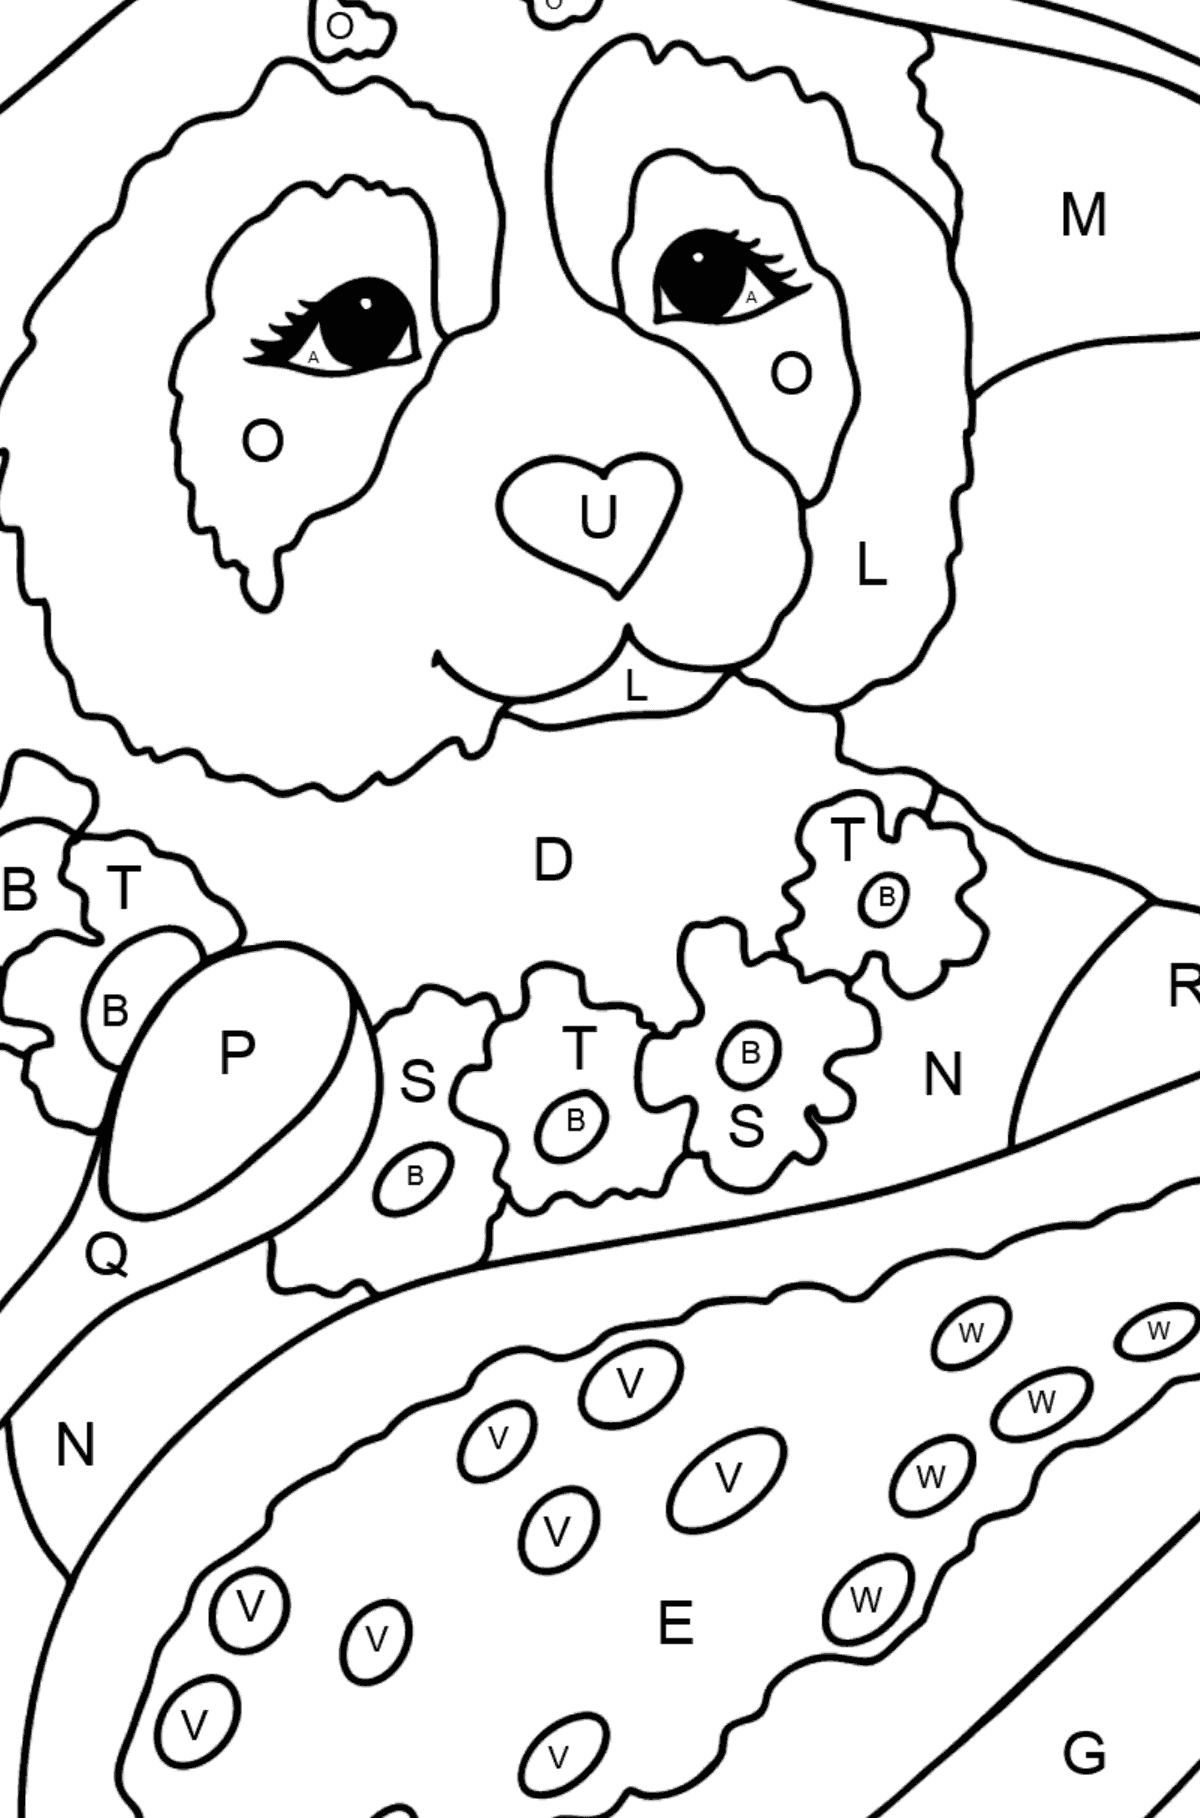 Coloring Page - A Panda is Eating Papaya - Coloring by Letters for Kids